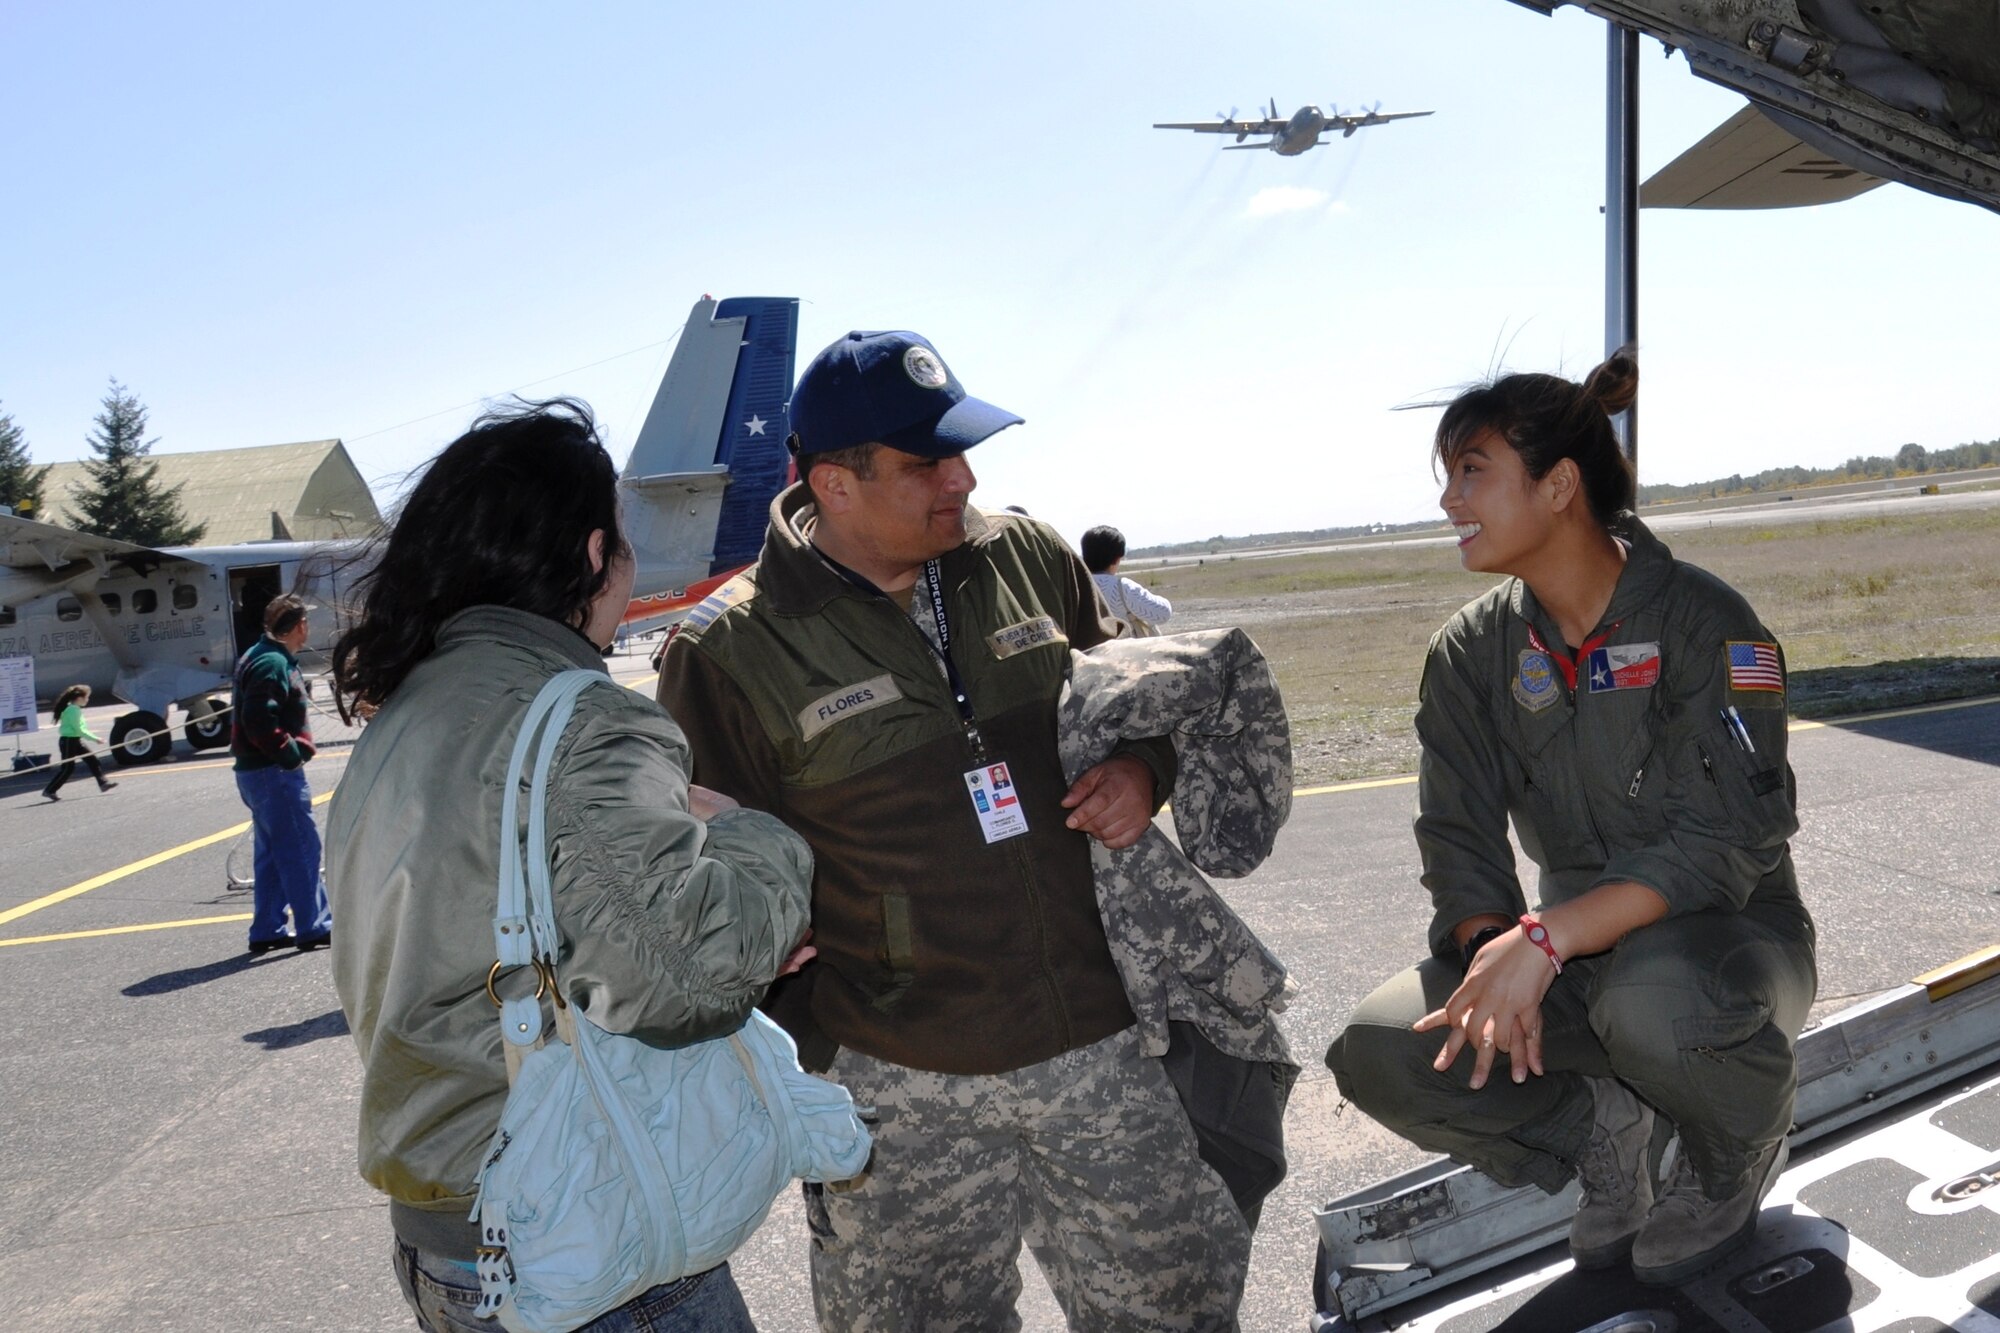 Staff Sgt. Michelle Jones, loadmaster with the 136th Airlift Wing, Texas Air National Guard, talks with Comandante L. Flores (Chilean Air Force) and his daughter about Sgt. Jones' work as a crew member on a C-130 Hercules and opportunities for females in the military at an open house.  The Oct. 8 Open House was part of a SICOFAA exercise (Sistema de cooperacion de las Fuerzas Aerias de las Americas), Cooperation 1 headquartered in Puerto Montt, Chile, Oct. 4 to 14. The exercise scenario involved using the air forces of SICOFAA member nations for humanitarian assistance after a natural disaster (U.S. Air Force photo/Capt. Rebecca A. Garcia).